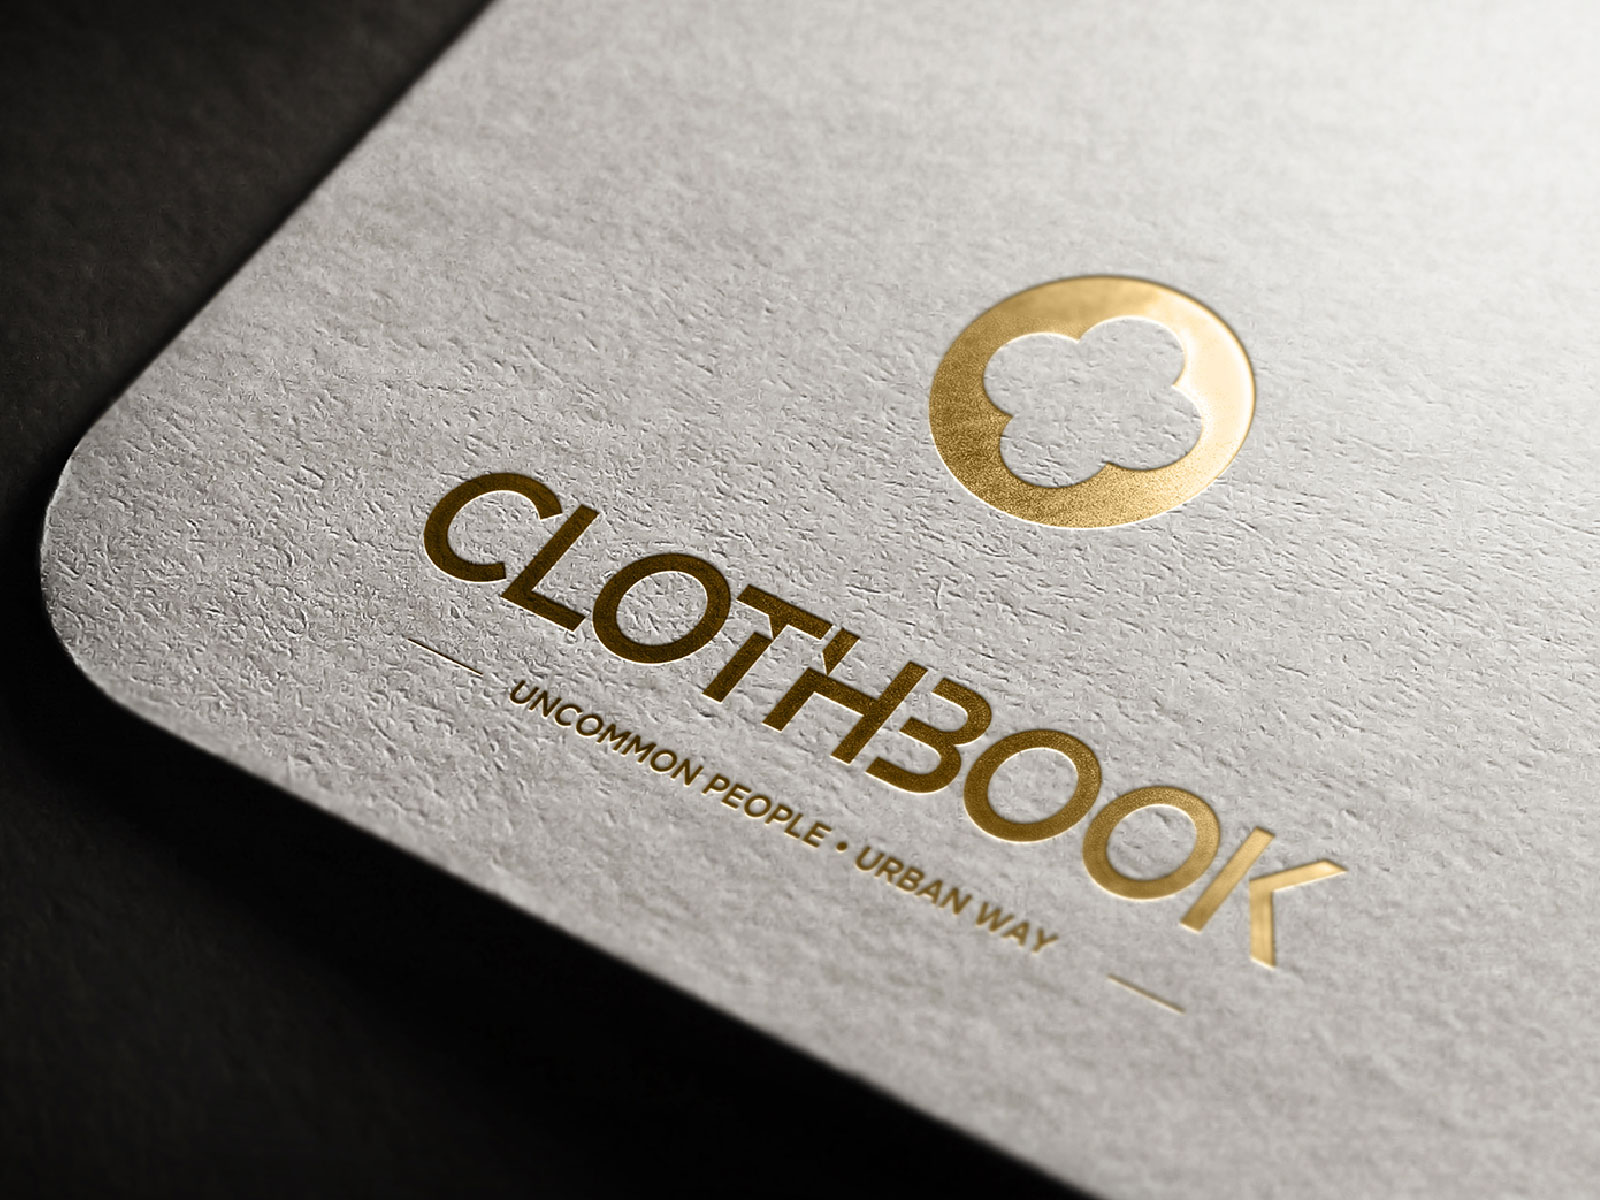 clothbook
high quality graphics